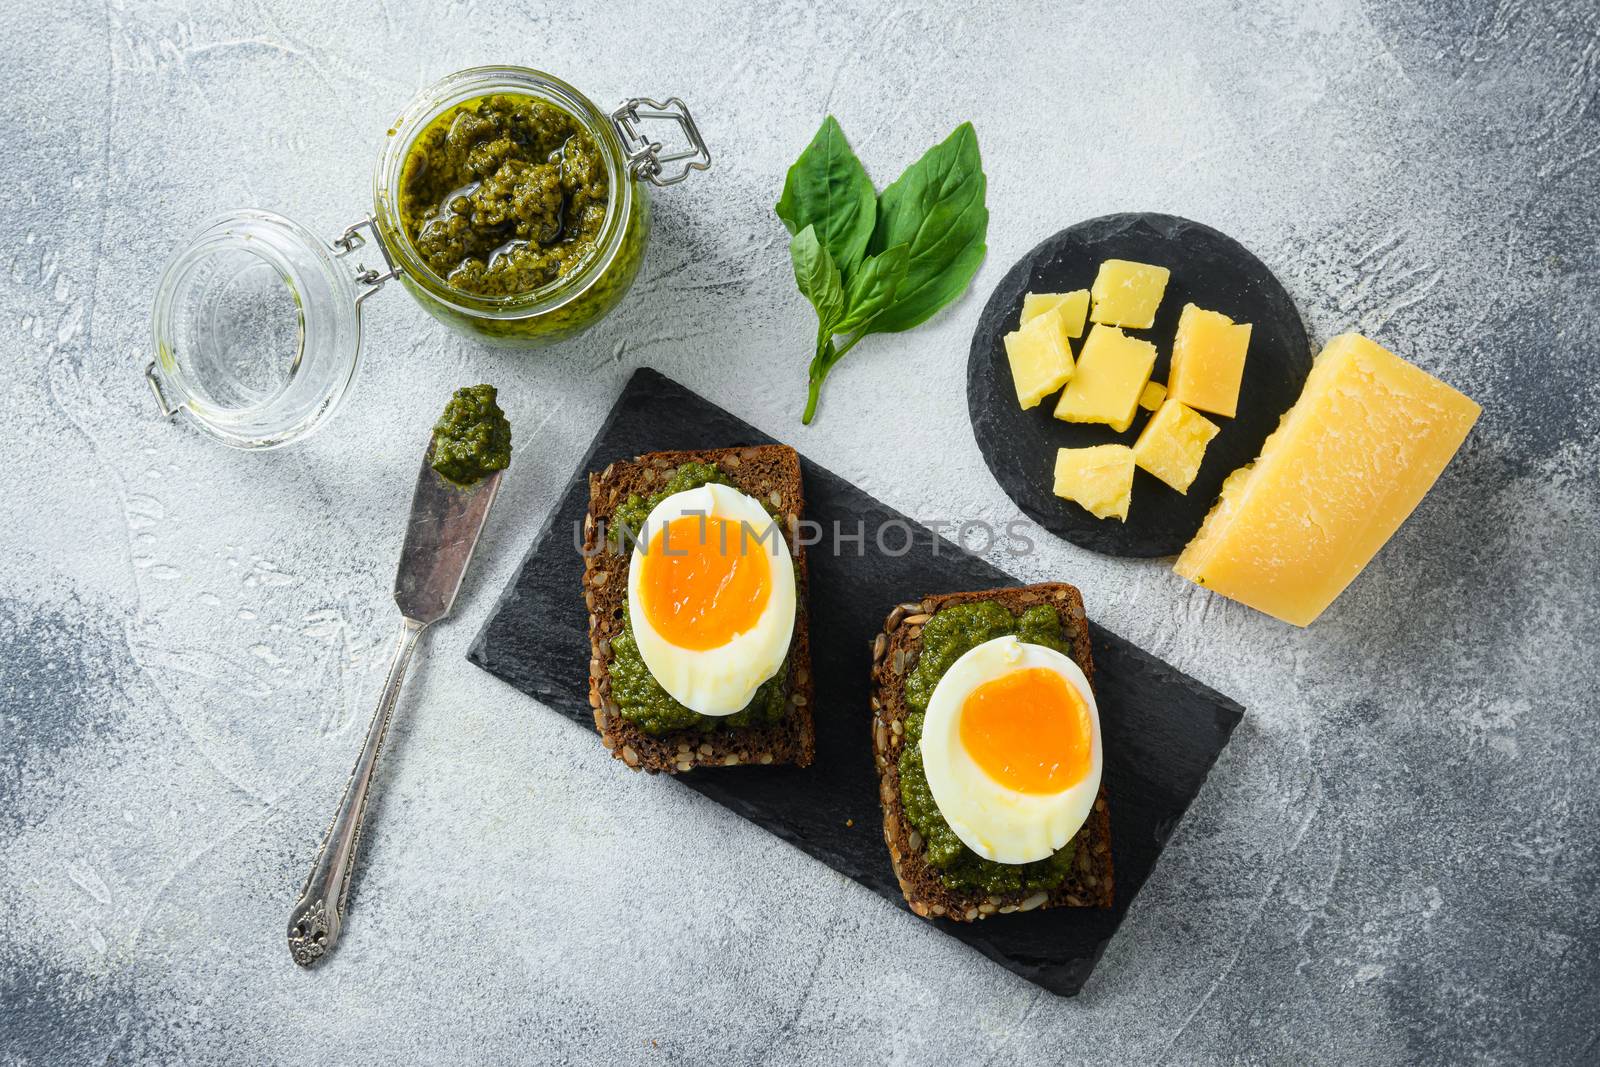 homemade eggs panini bread with Green basil pesto silver spoon on italian breakfast with ingredients green pesto on grey and white concrete table surface top view by Ilianesolenyi